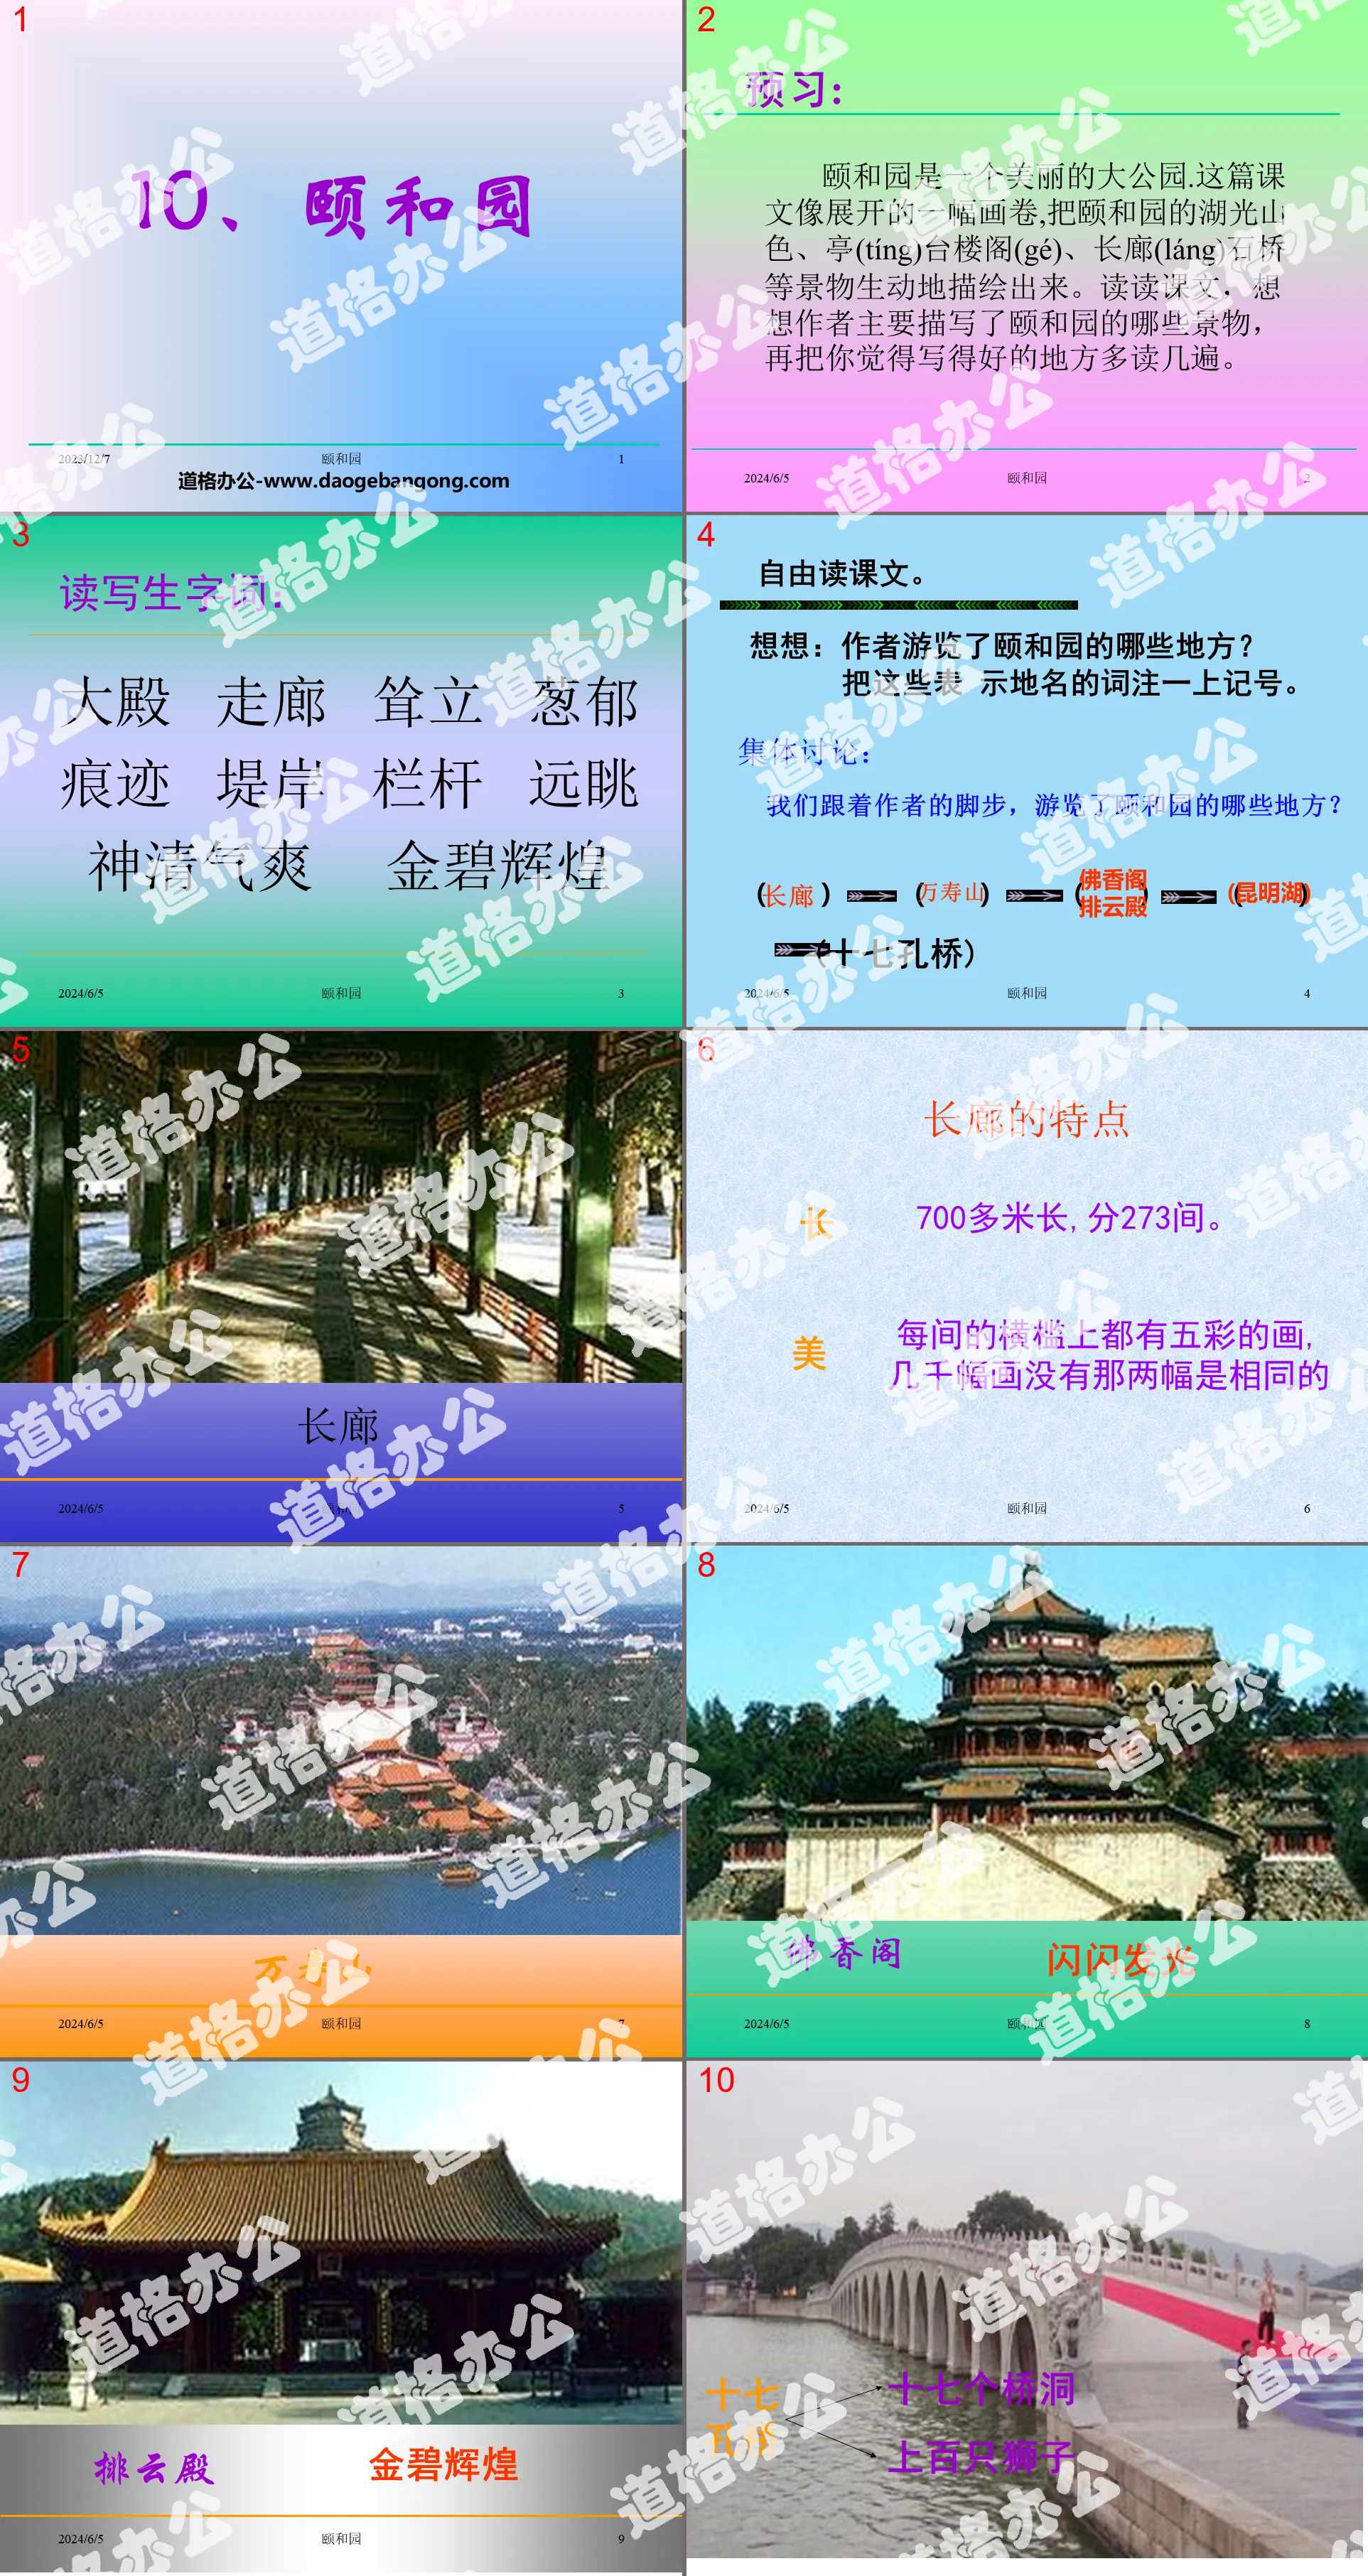 "Summer Palace" PPT courseware download 4